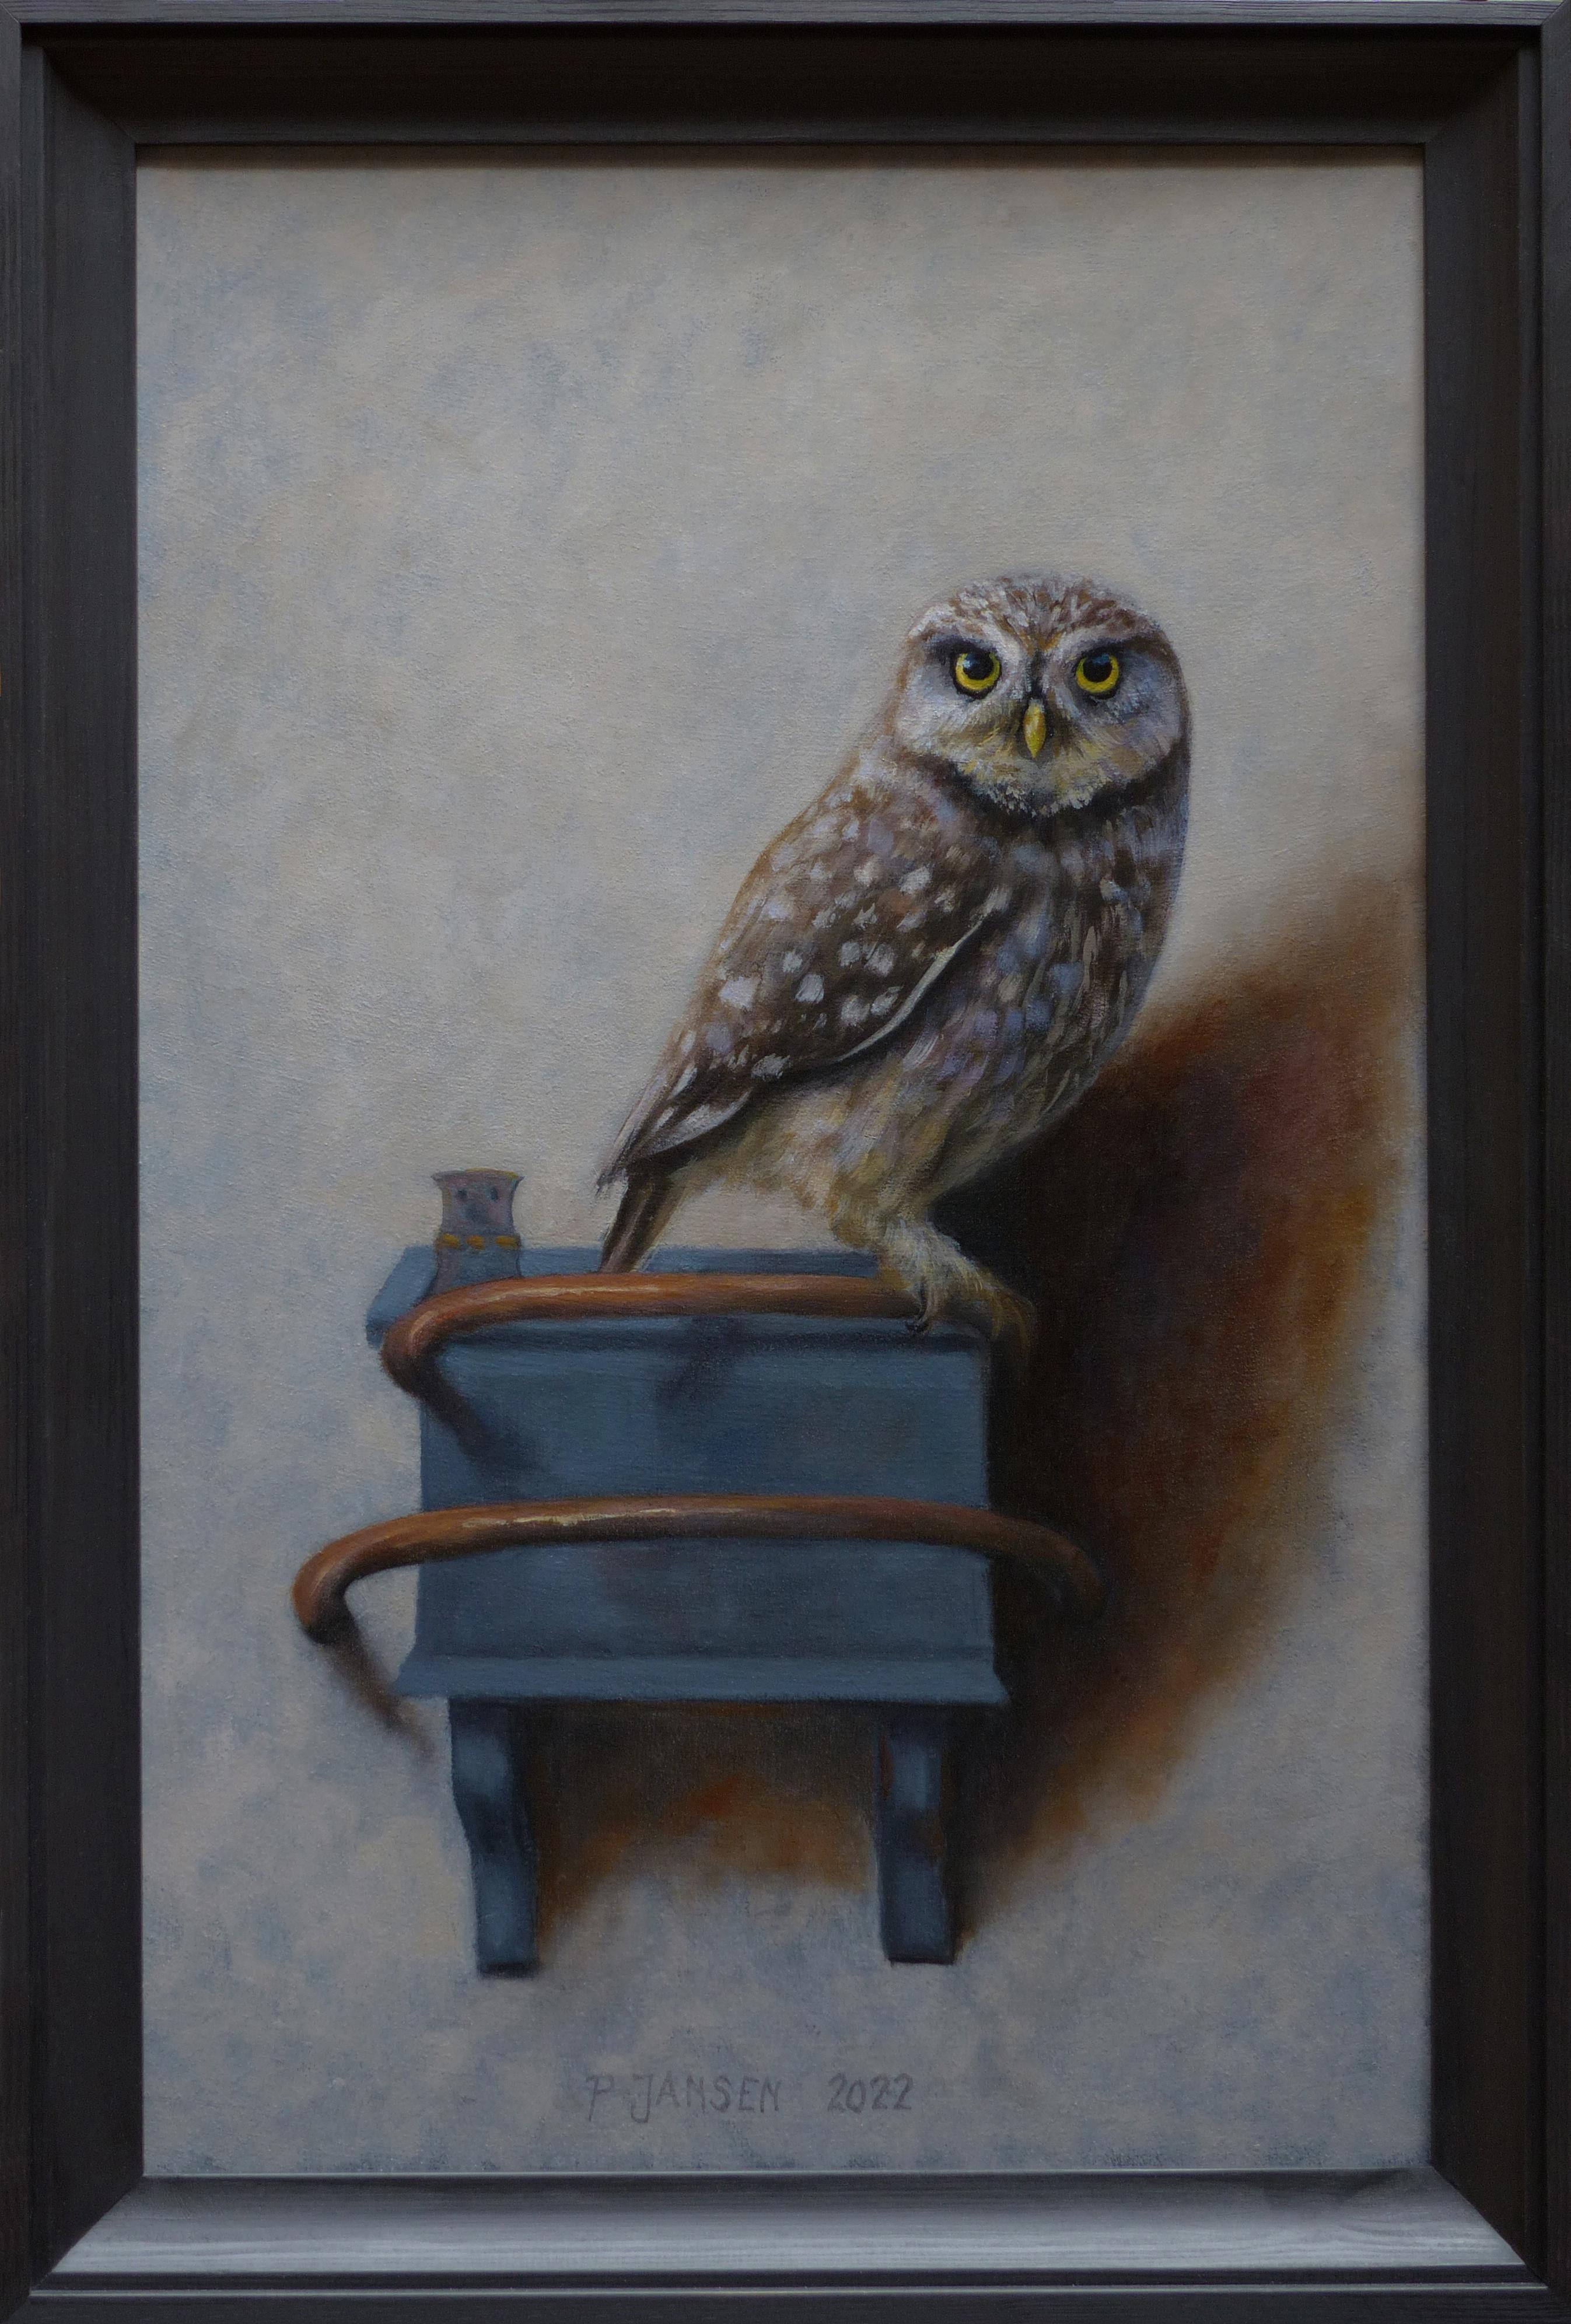 Paul Jansen Animal Painting - "Little Owl" Contemporary Dutch Oil Painting of an Owl inspired by Fabritius